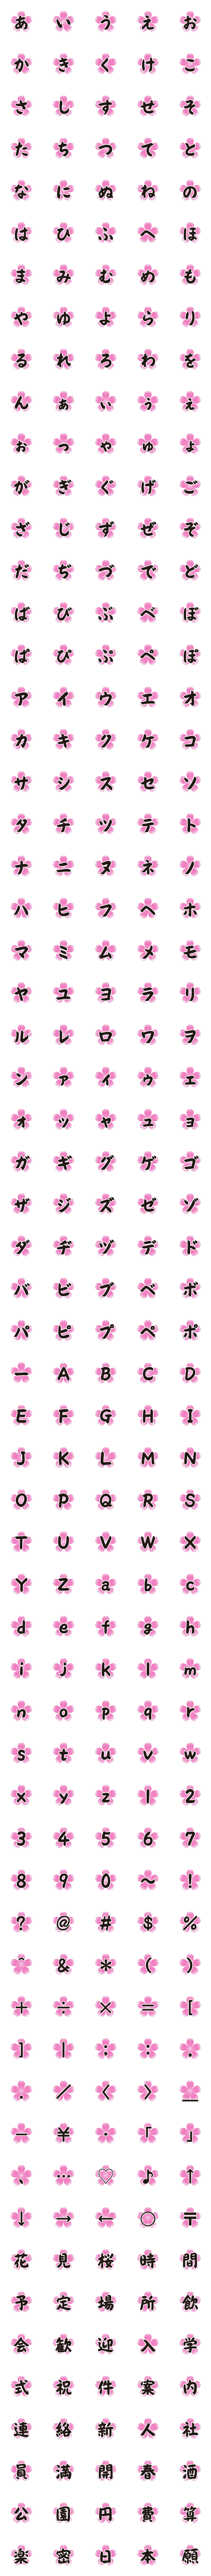 [LINE絵文字]春の桜デコ文字 305文字の画像一覧